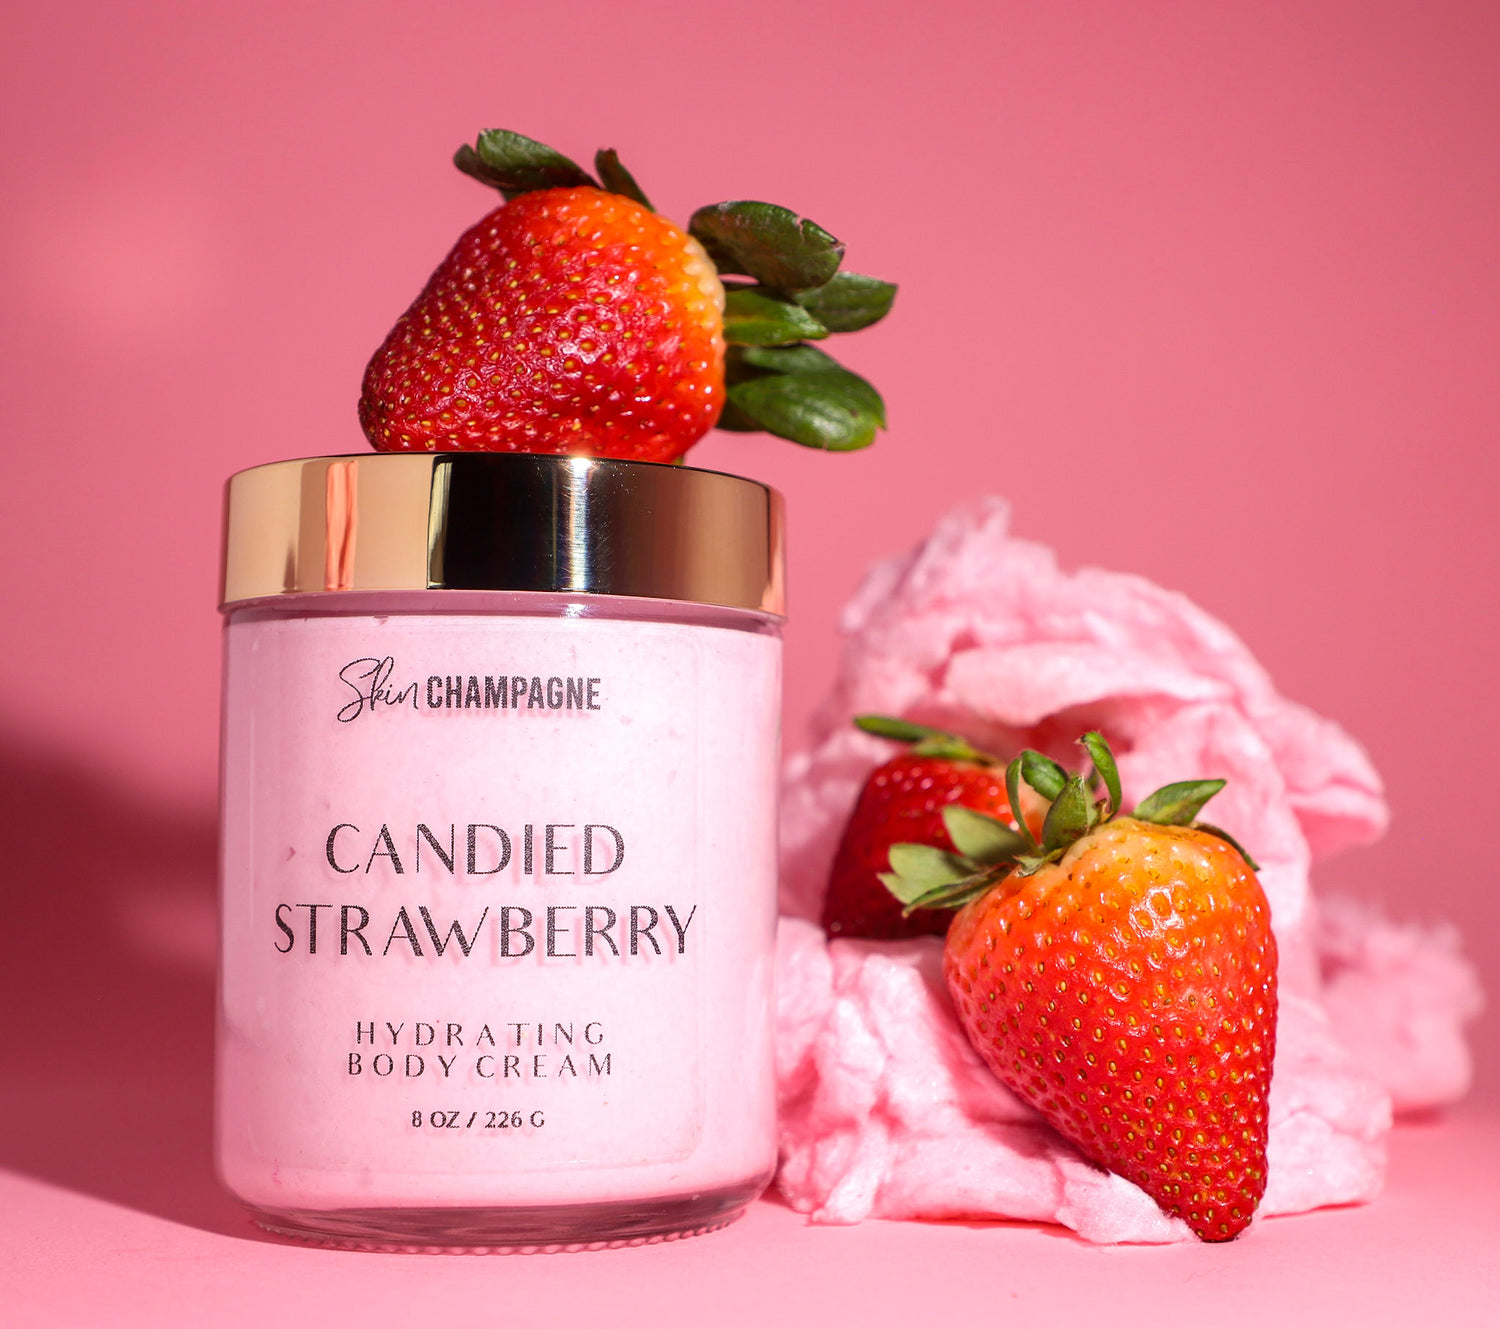 CANDIED STRAWBERRY